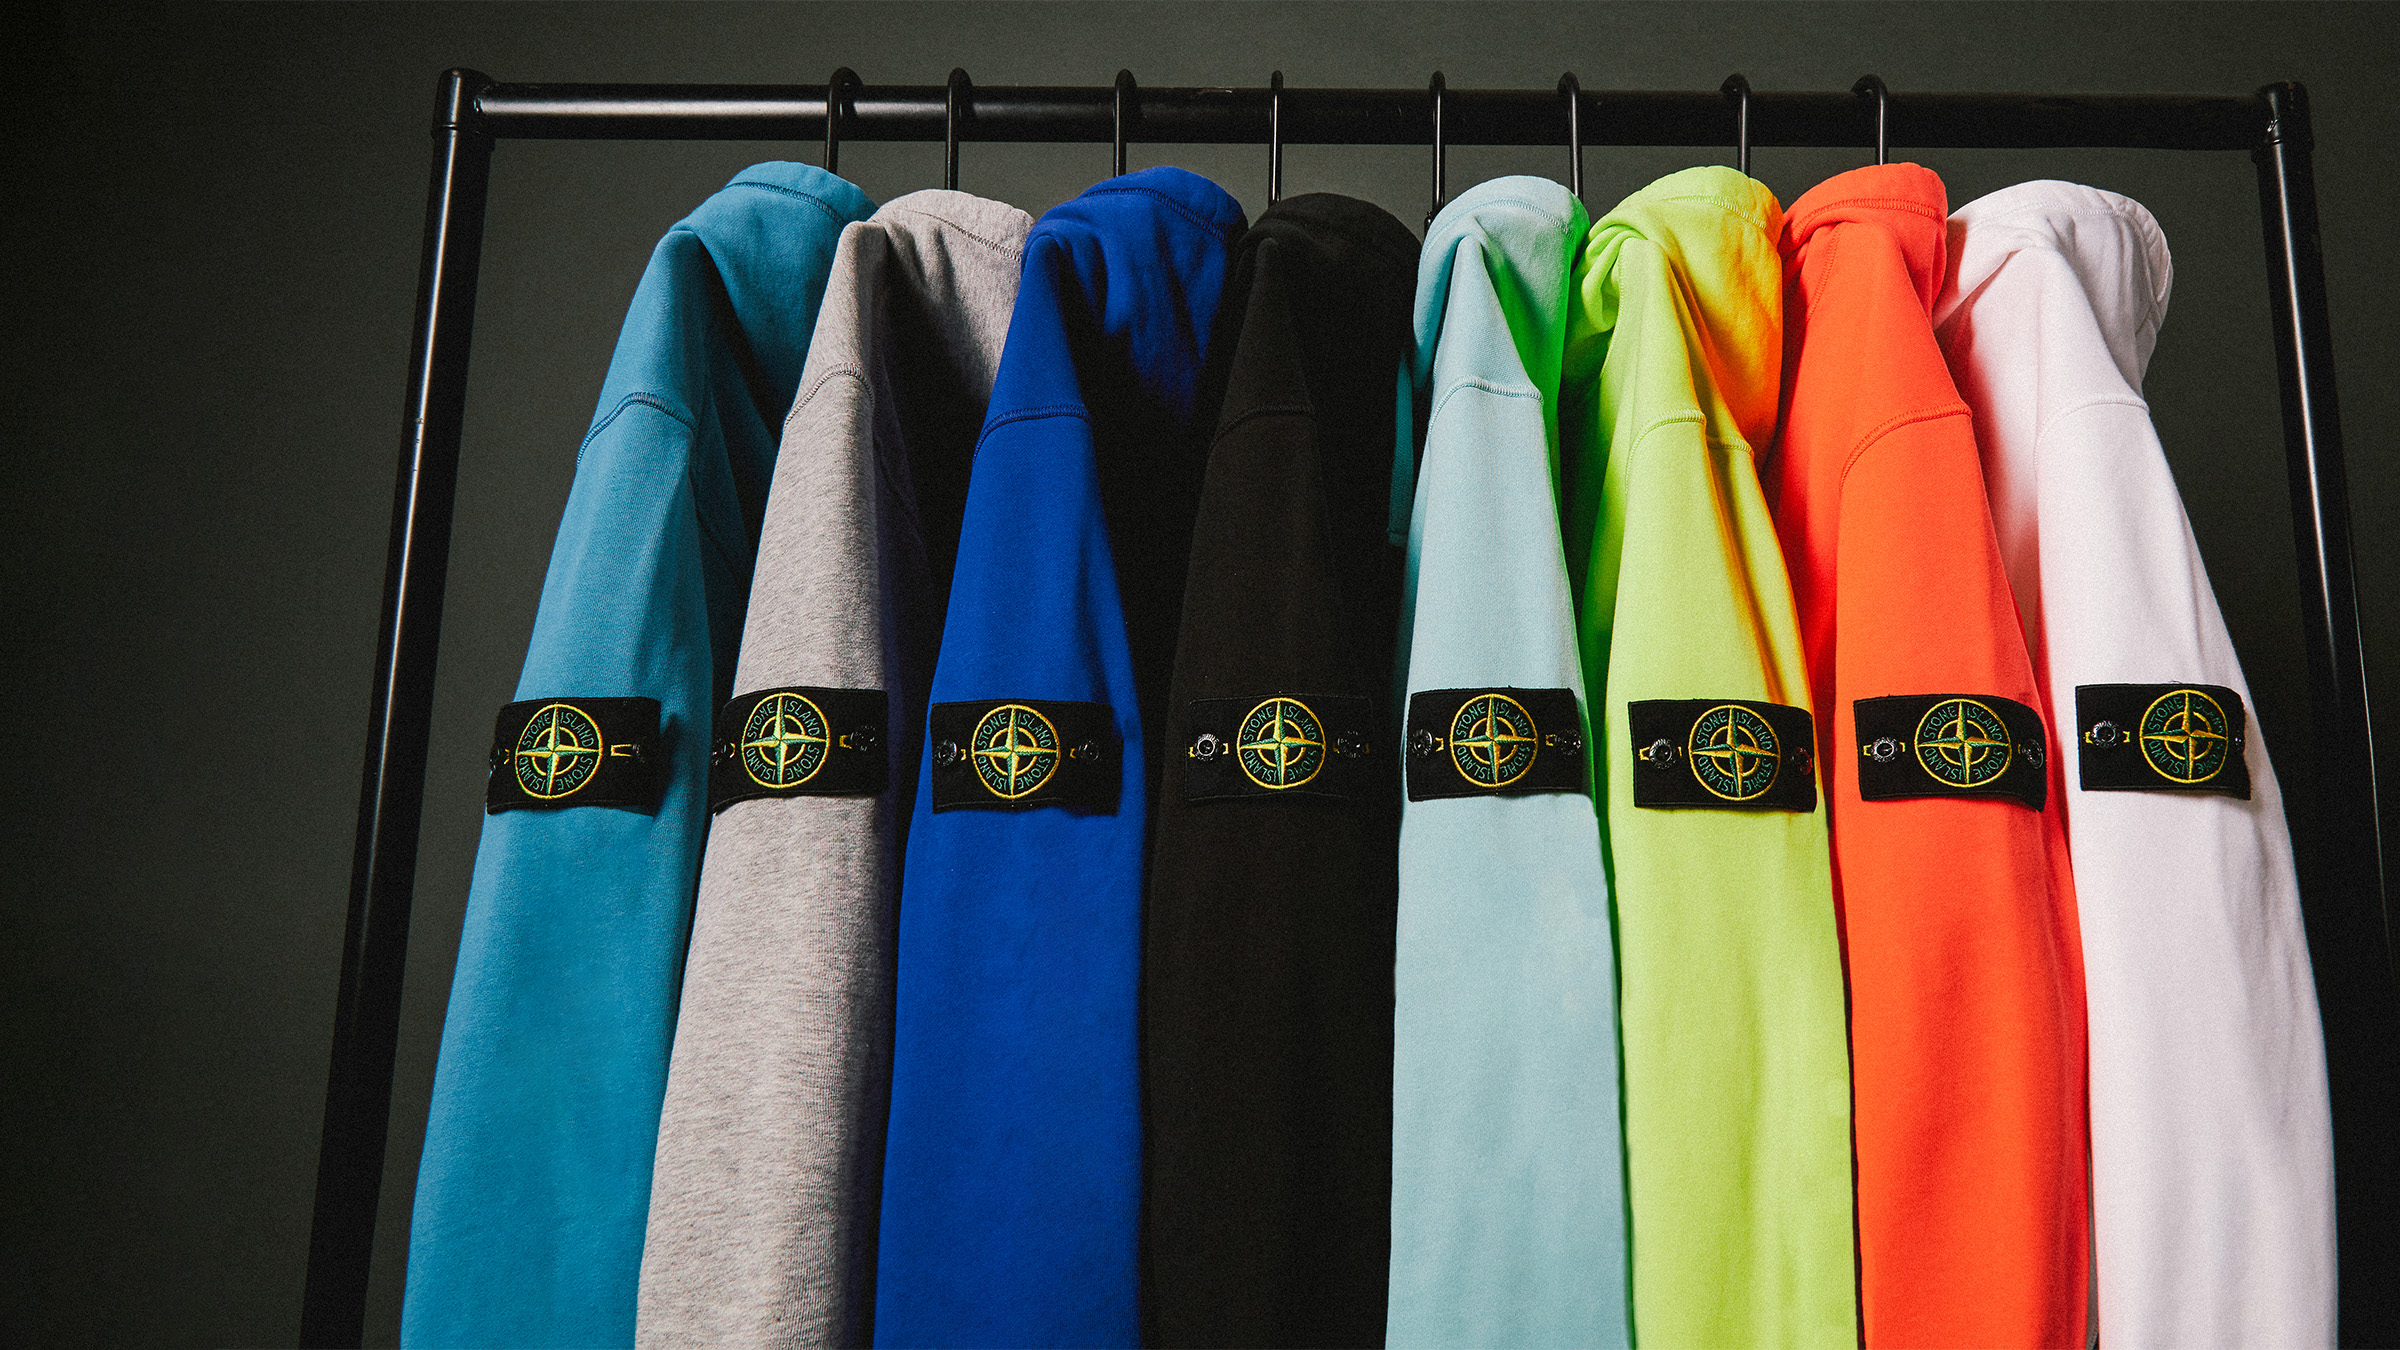 Stone Island for Men | END. (CN)